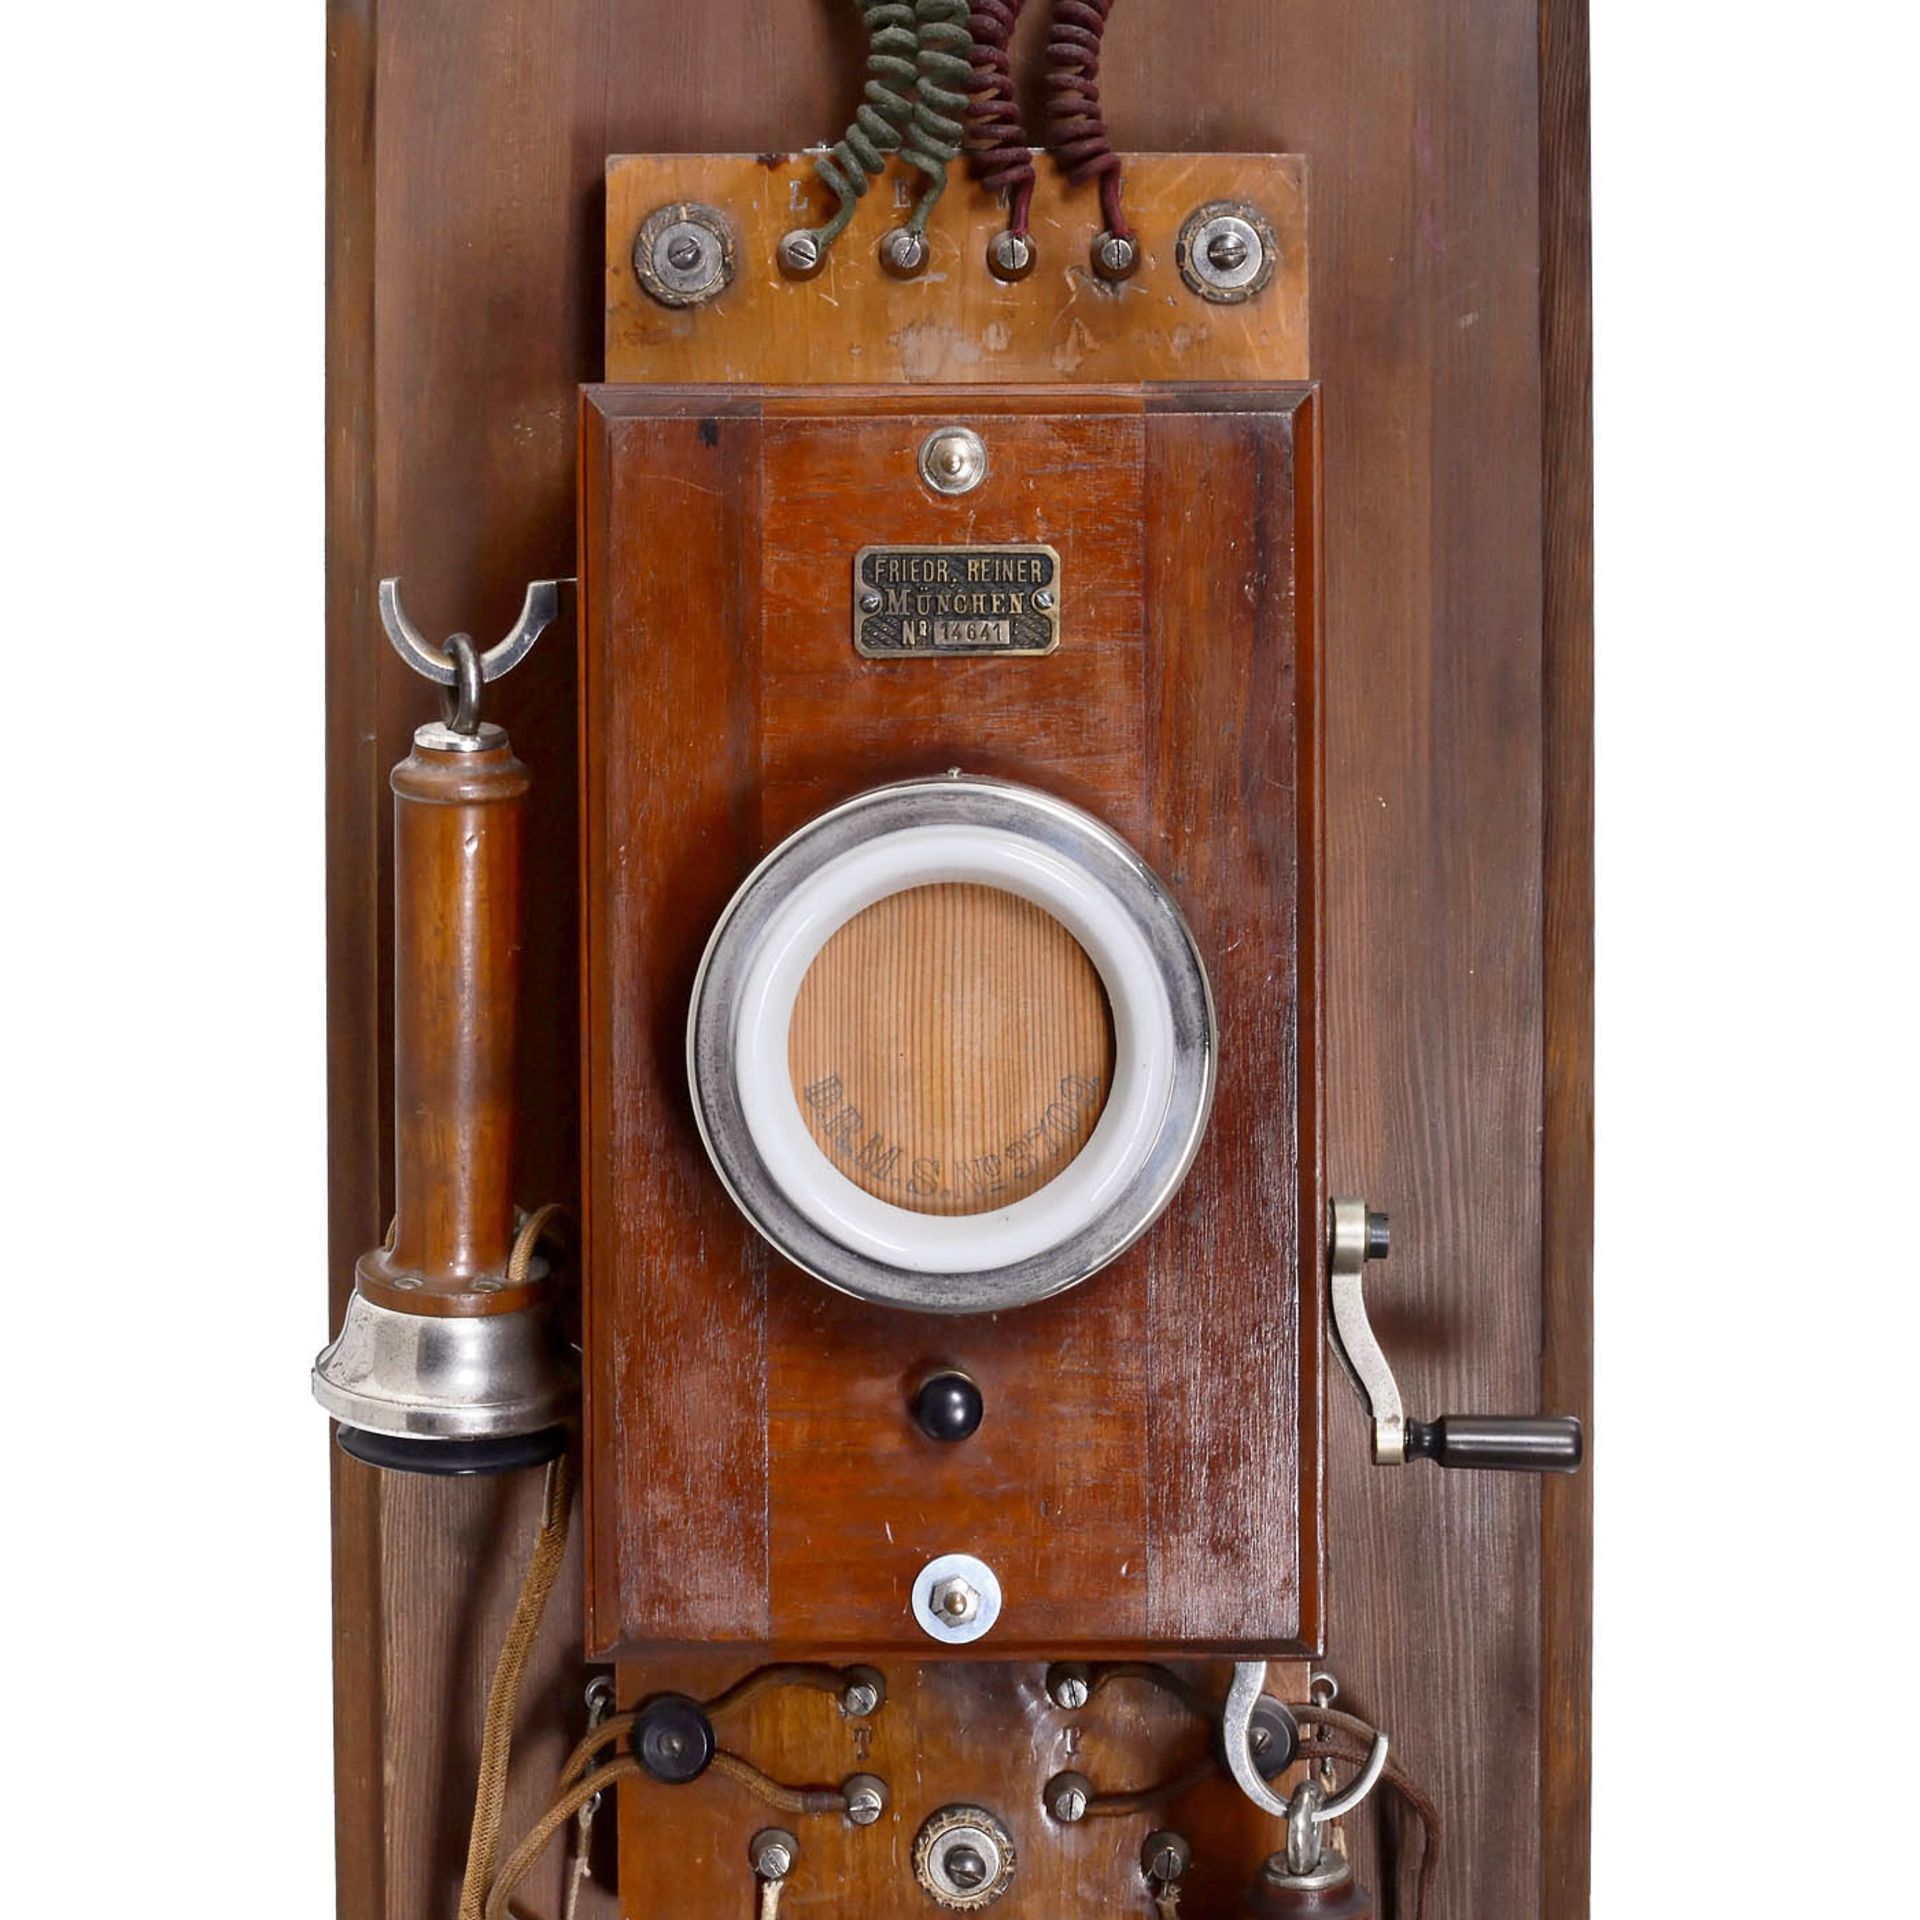 Bavarian Wall-mounted Telephone Station by Reiner, 1892 onwards - Image 4 of 4